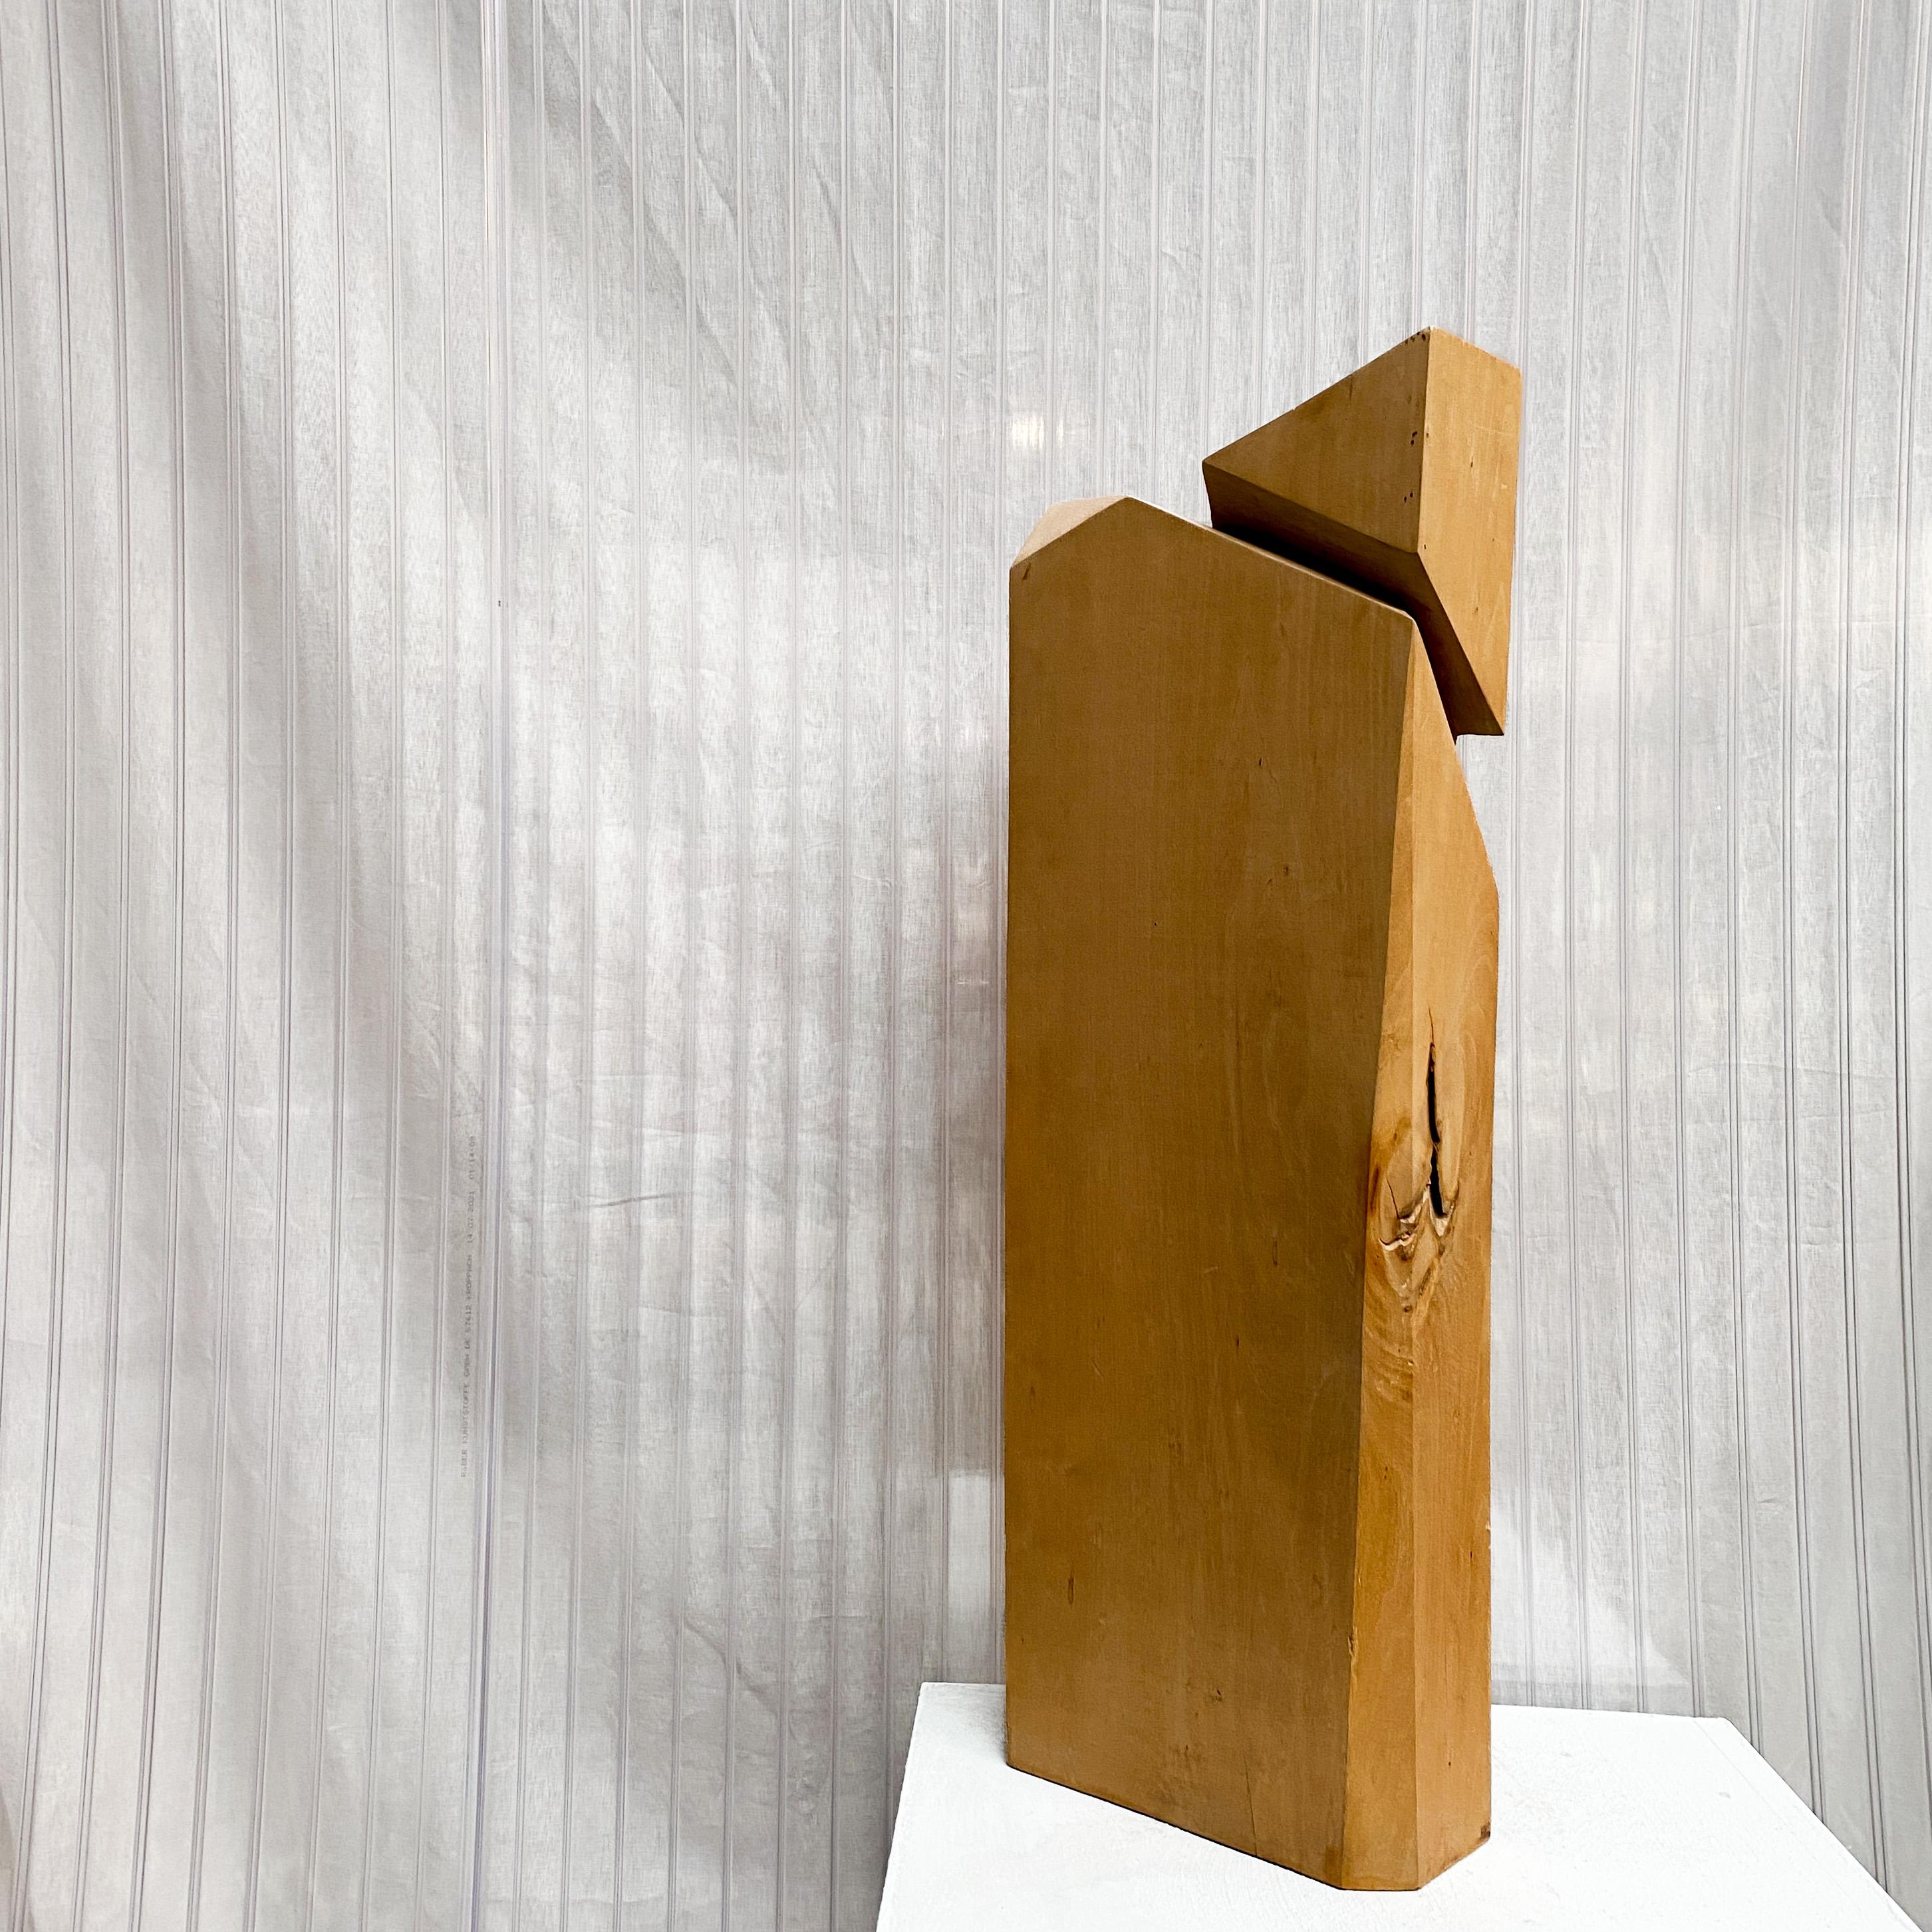 This beautiful Mid-Century Modern wooden sculpture, comes from the collection of a Dutch architect. It features a large rectangular wooden body, ending a triangular carved top which creates a striking juxtaposition and beautifully highlights the